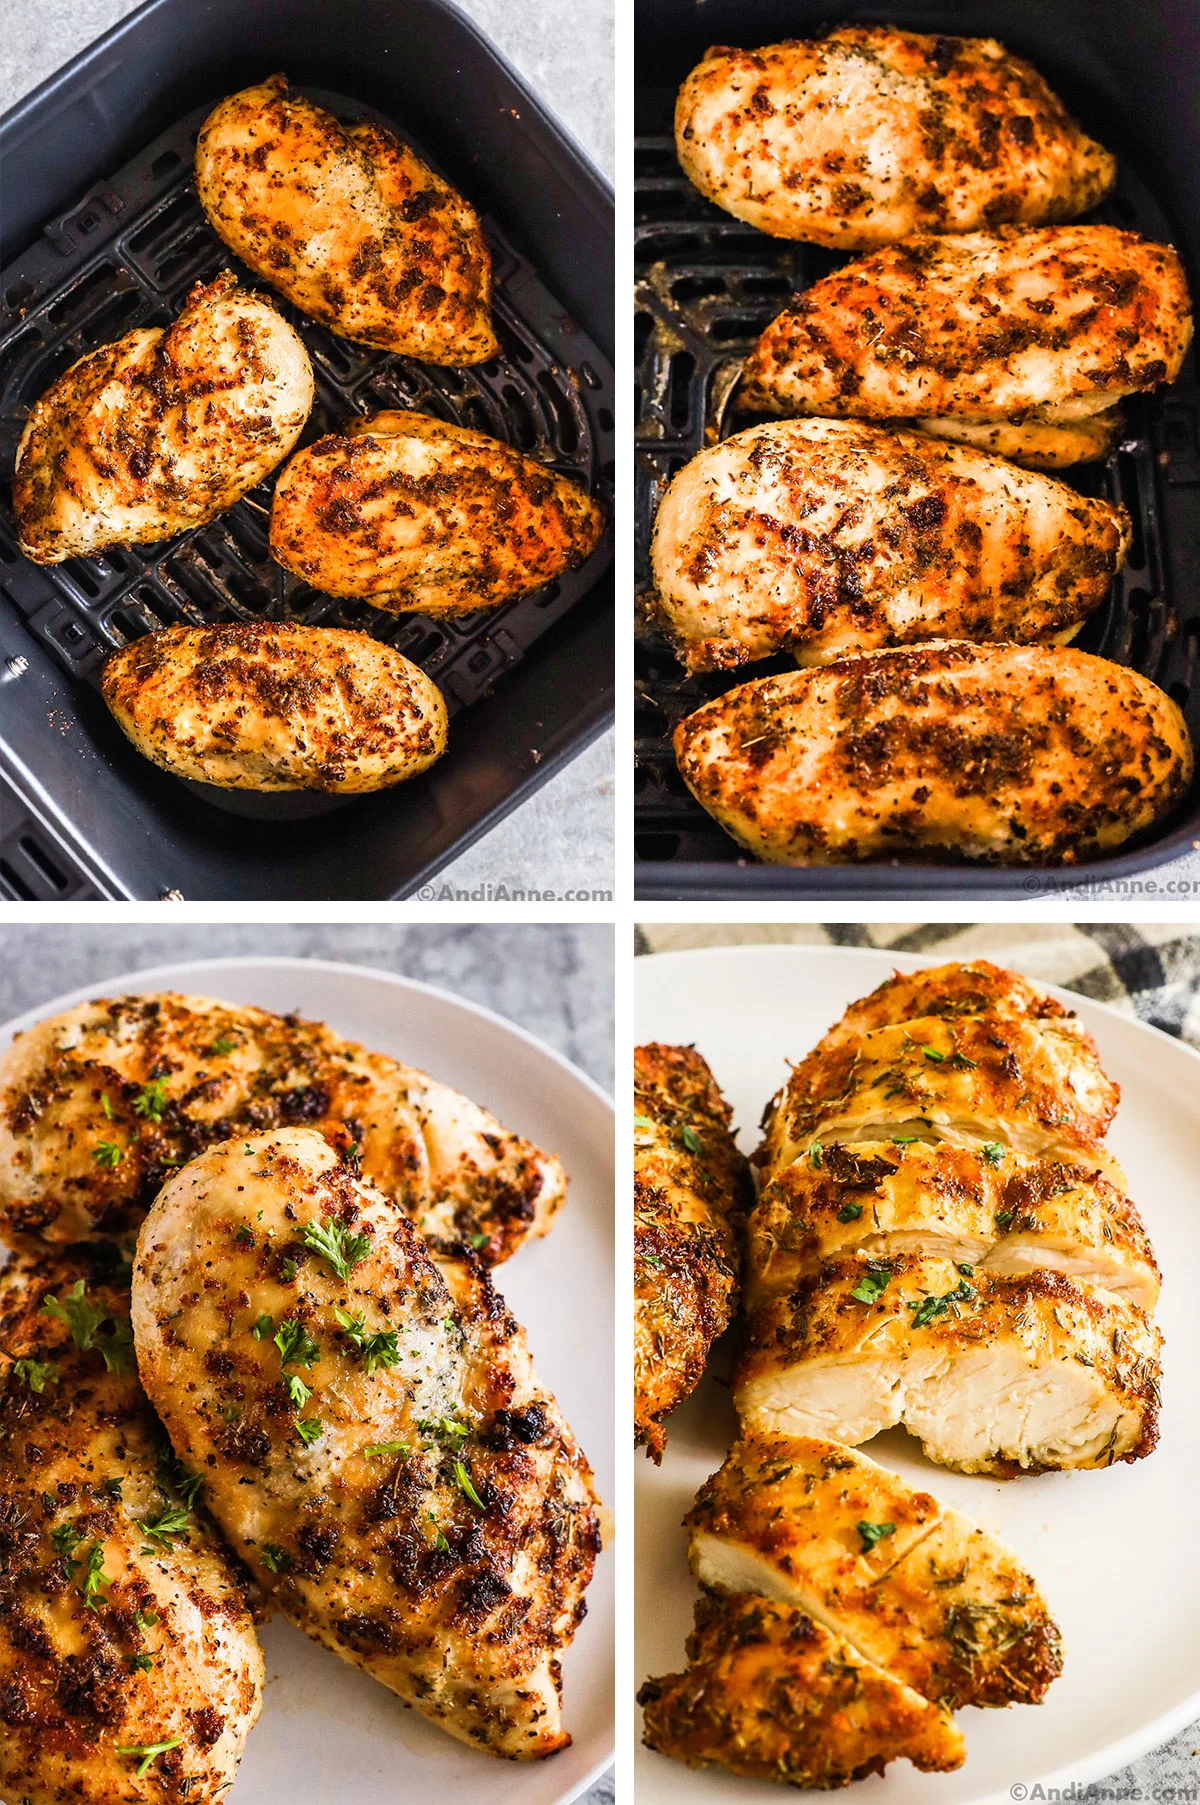 Four images of cooked chicken breast. First two in air fryer basket, Second two on a plate, with one sliced into strips.